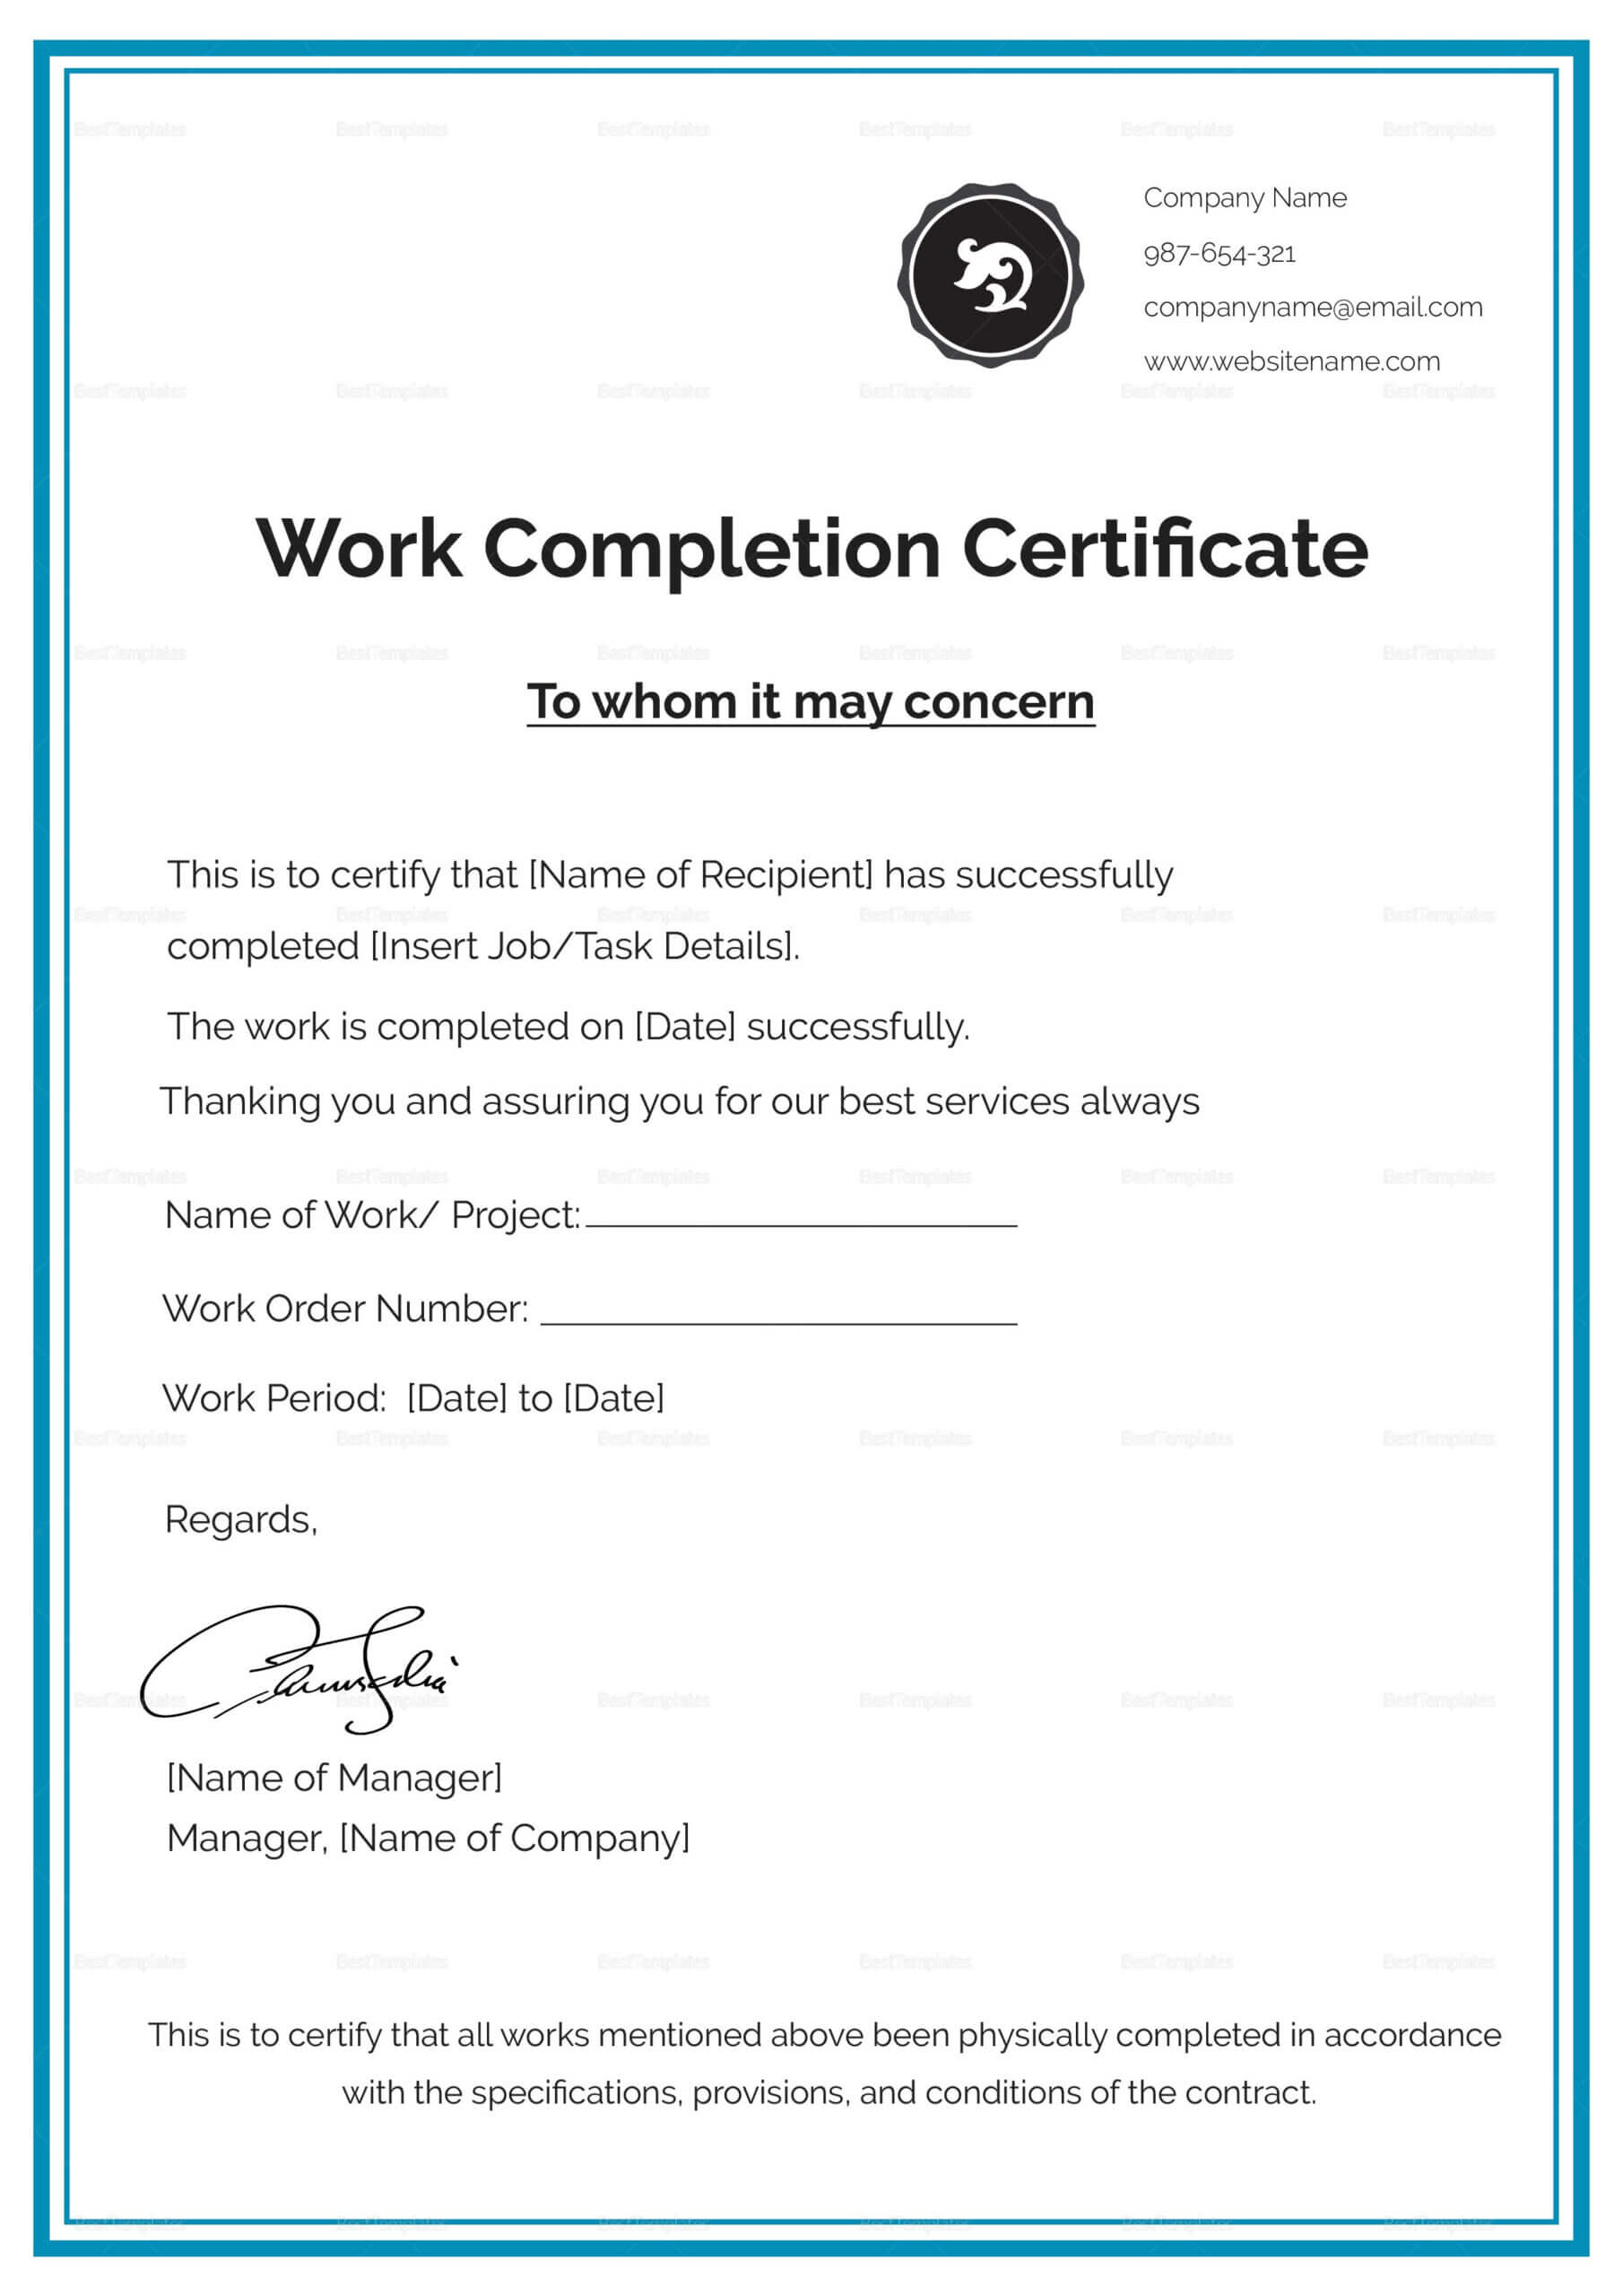 Work Completion Certificate Template | Business Letter For Construction Certificate Of Completion Template